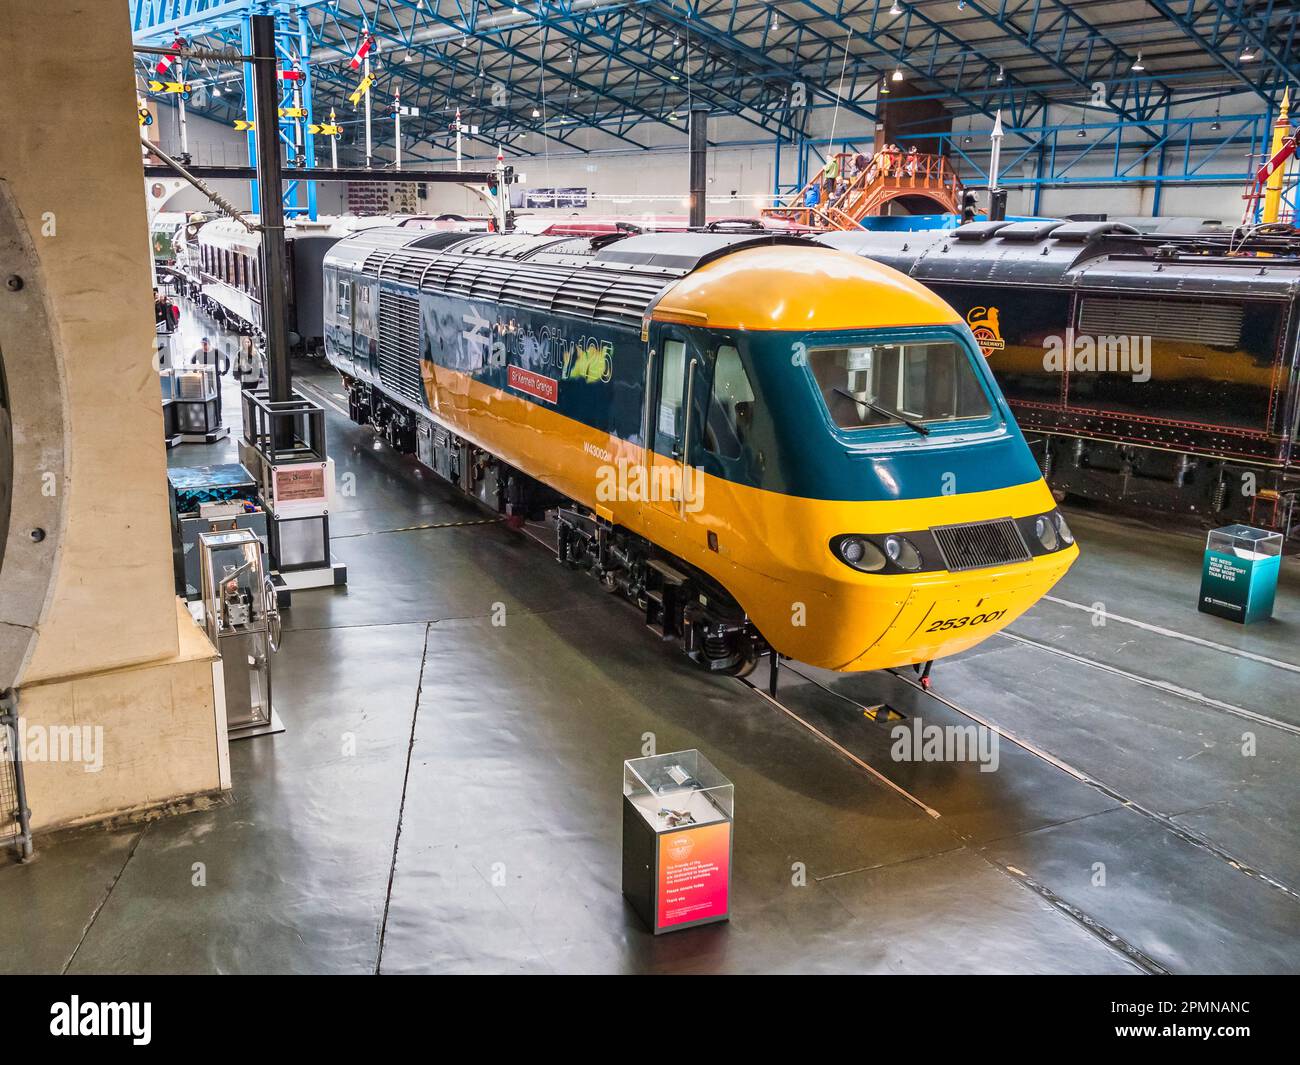 General image inside the National Railway Museum in York seen here overlooking the great hall that features two of the Inter-City 125 diesel trains Stock Photo